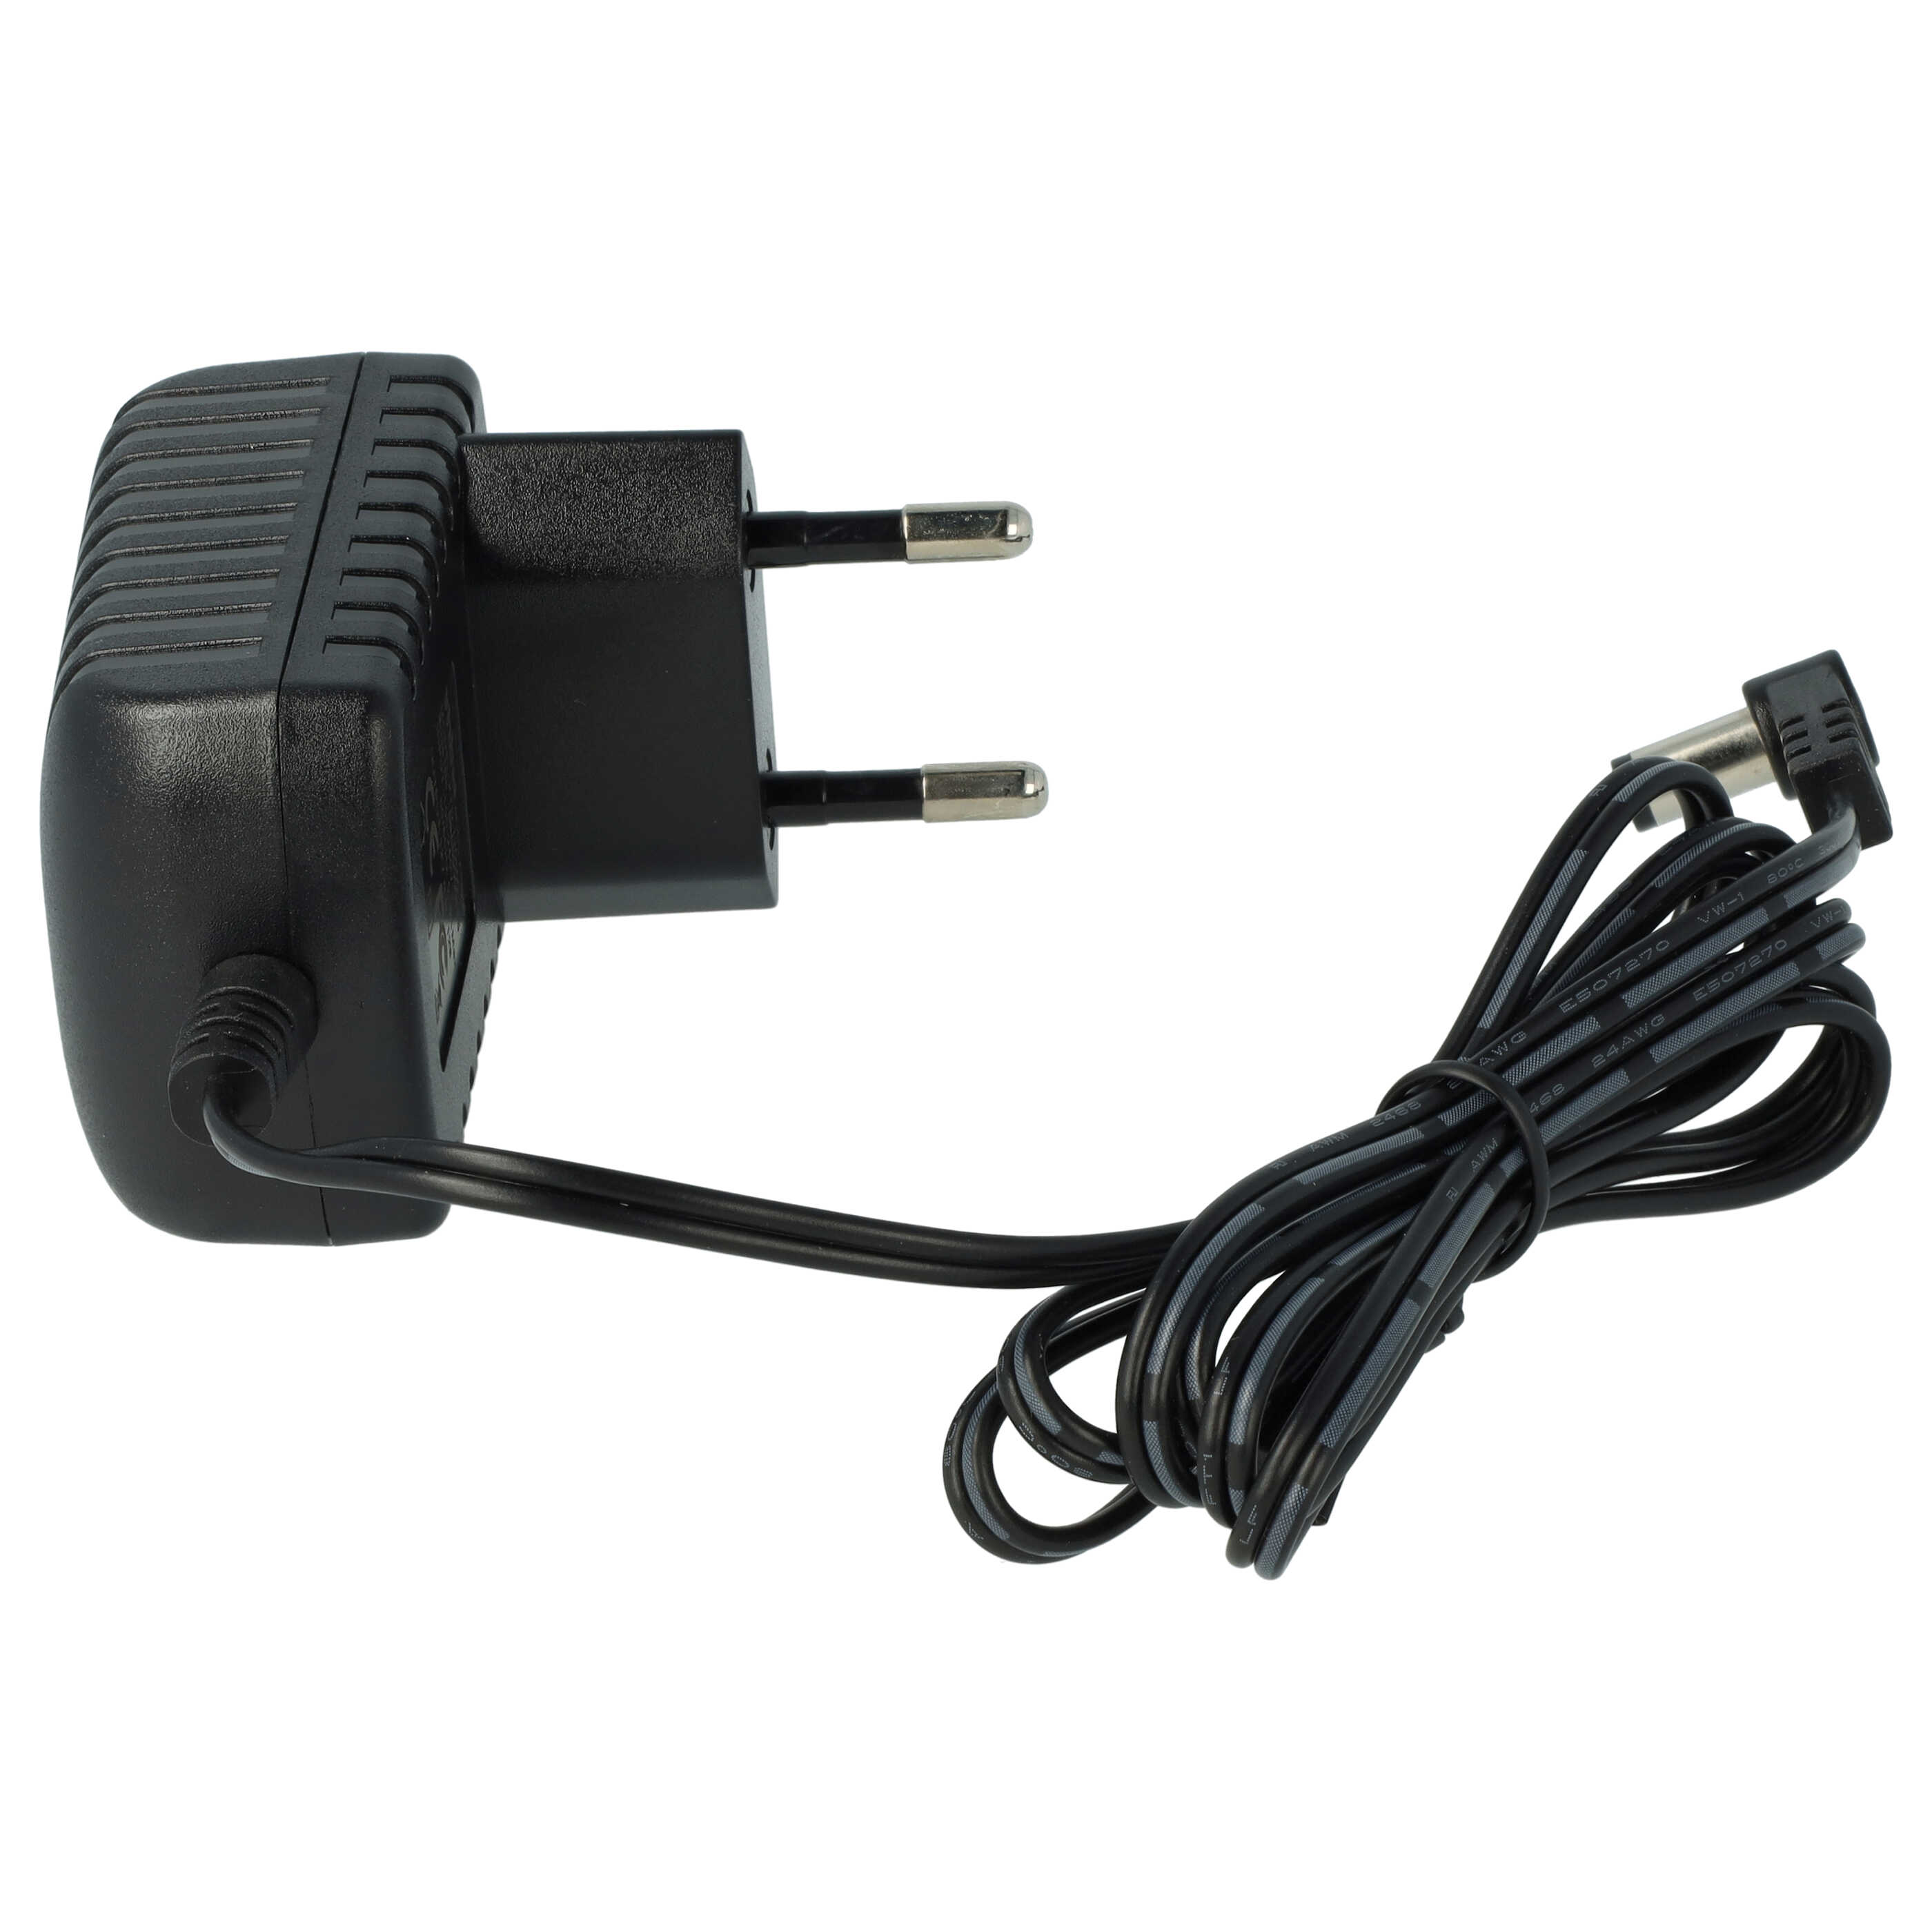 Mains Power Adapter replaces Gigaset C39280-Z4-C706 for Gigaset Landline Telephone, Home Telephone - 120 cm